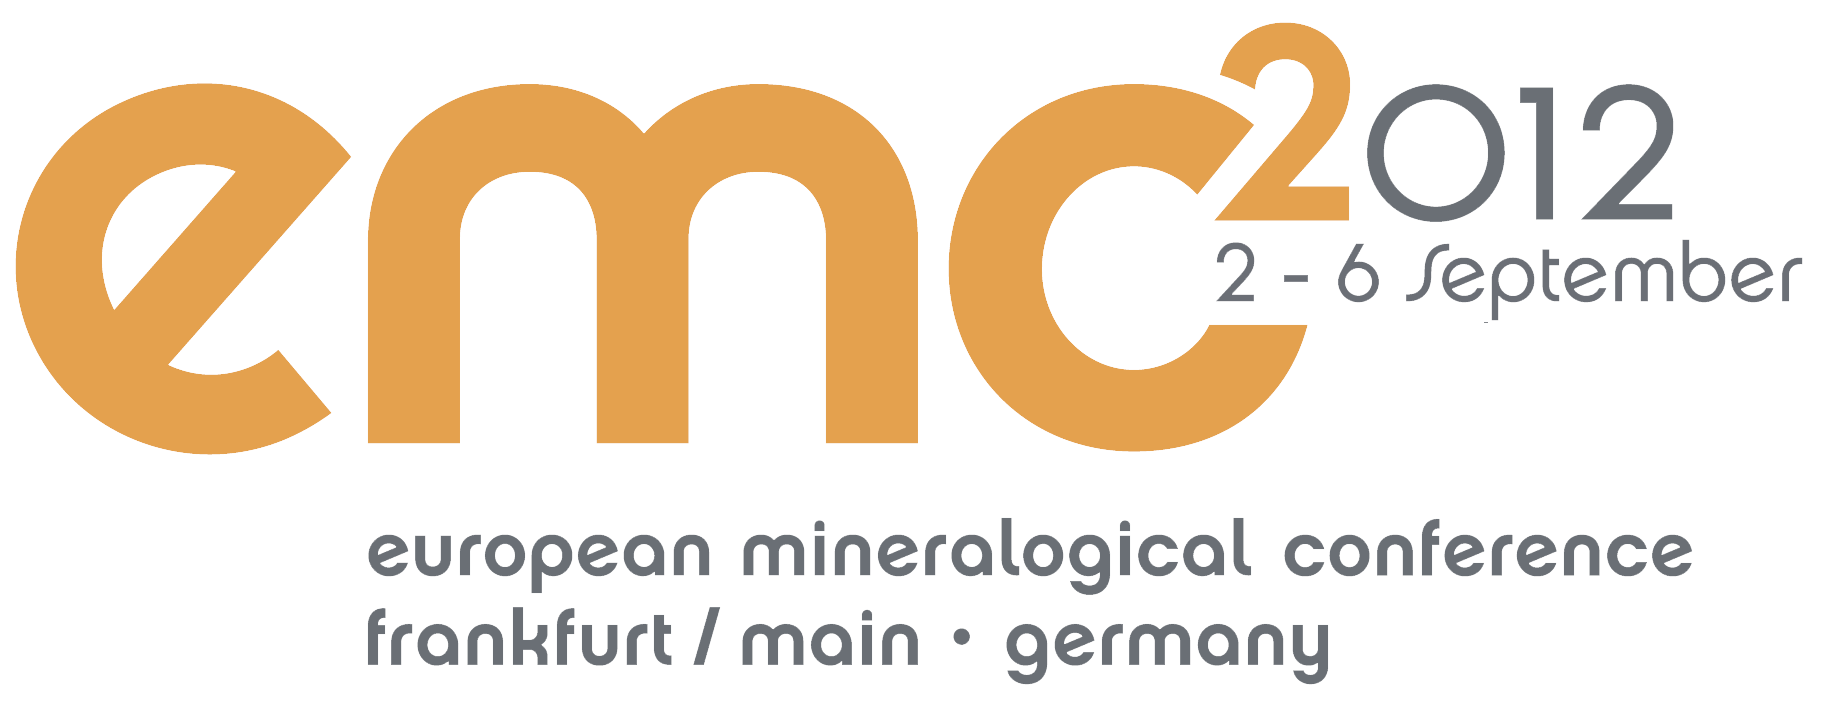 1st European Mineralogical Conference (EMC2012)